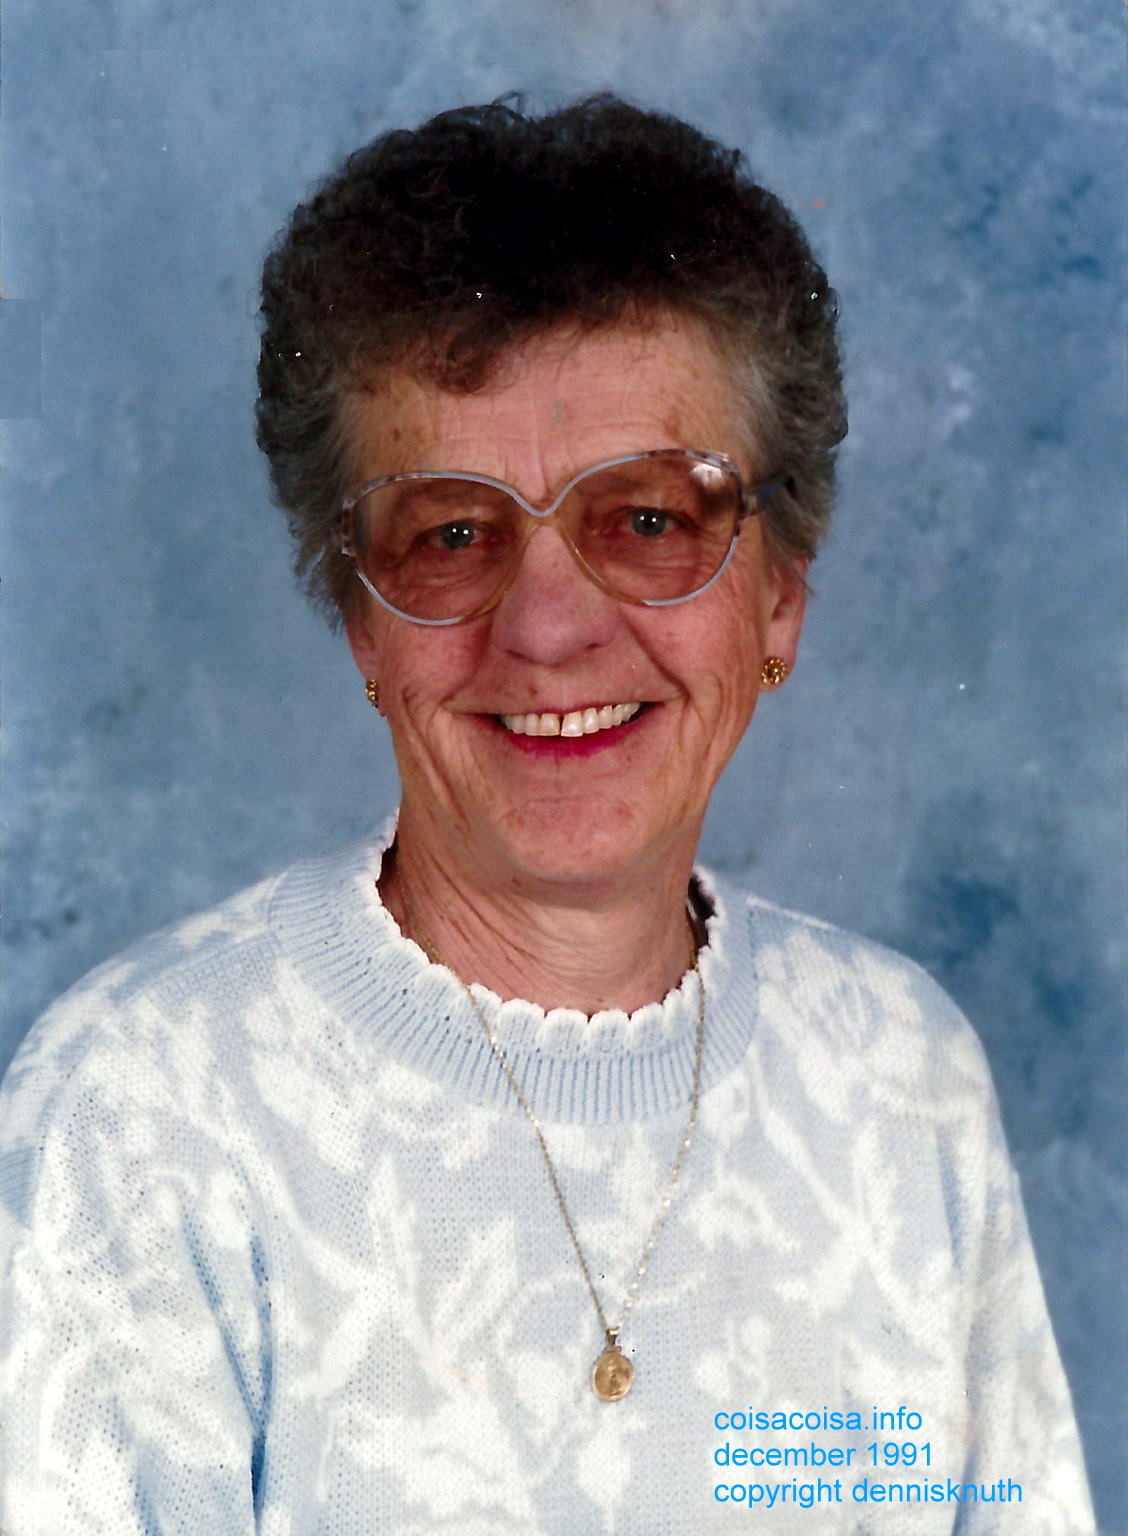 Emogene Knuth formal photograph with a smile